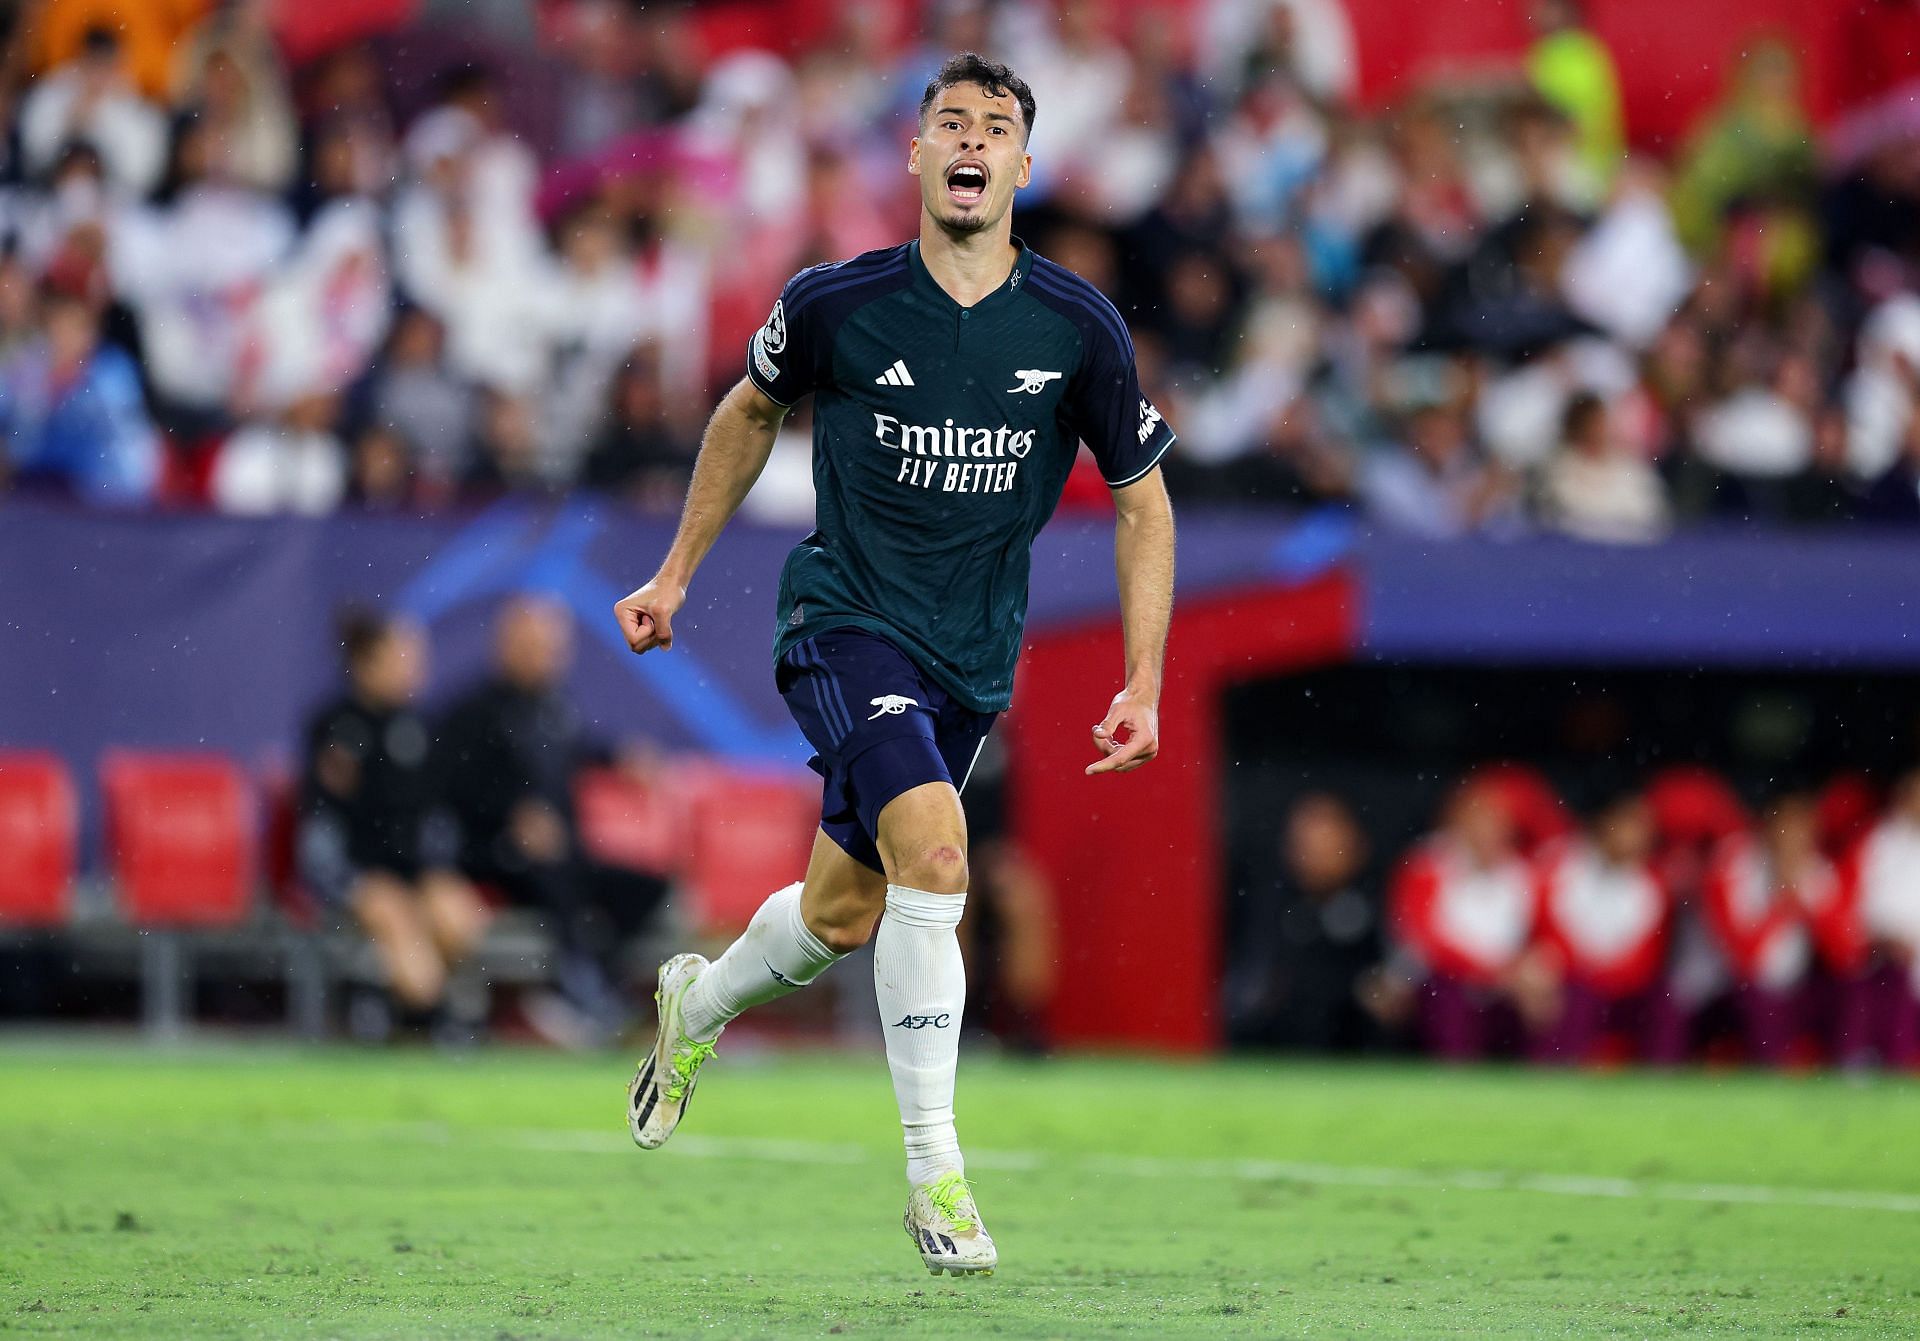 Gabriel Martinelli scored on his Champions League debut.